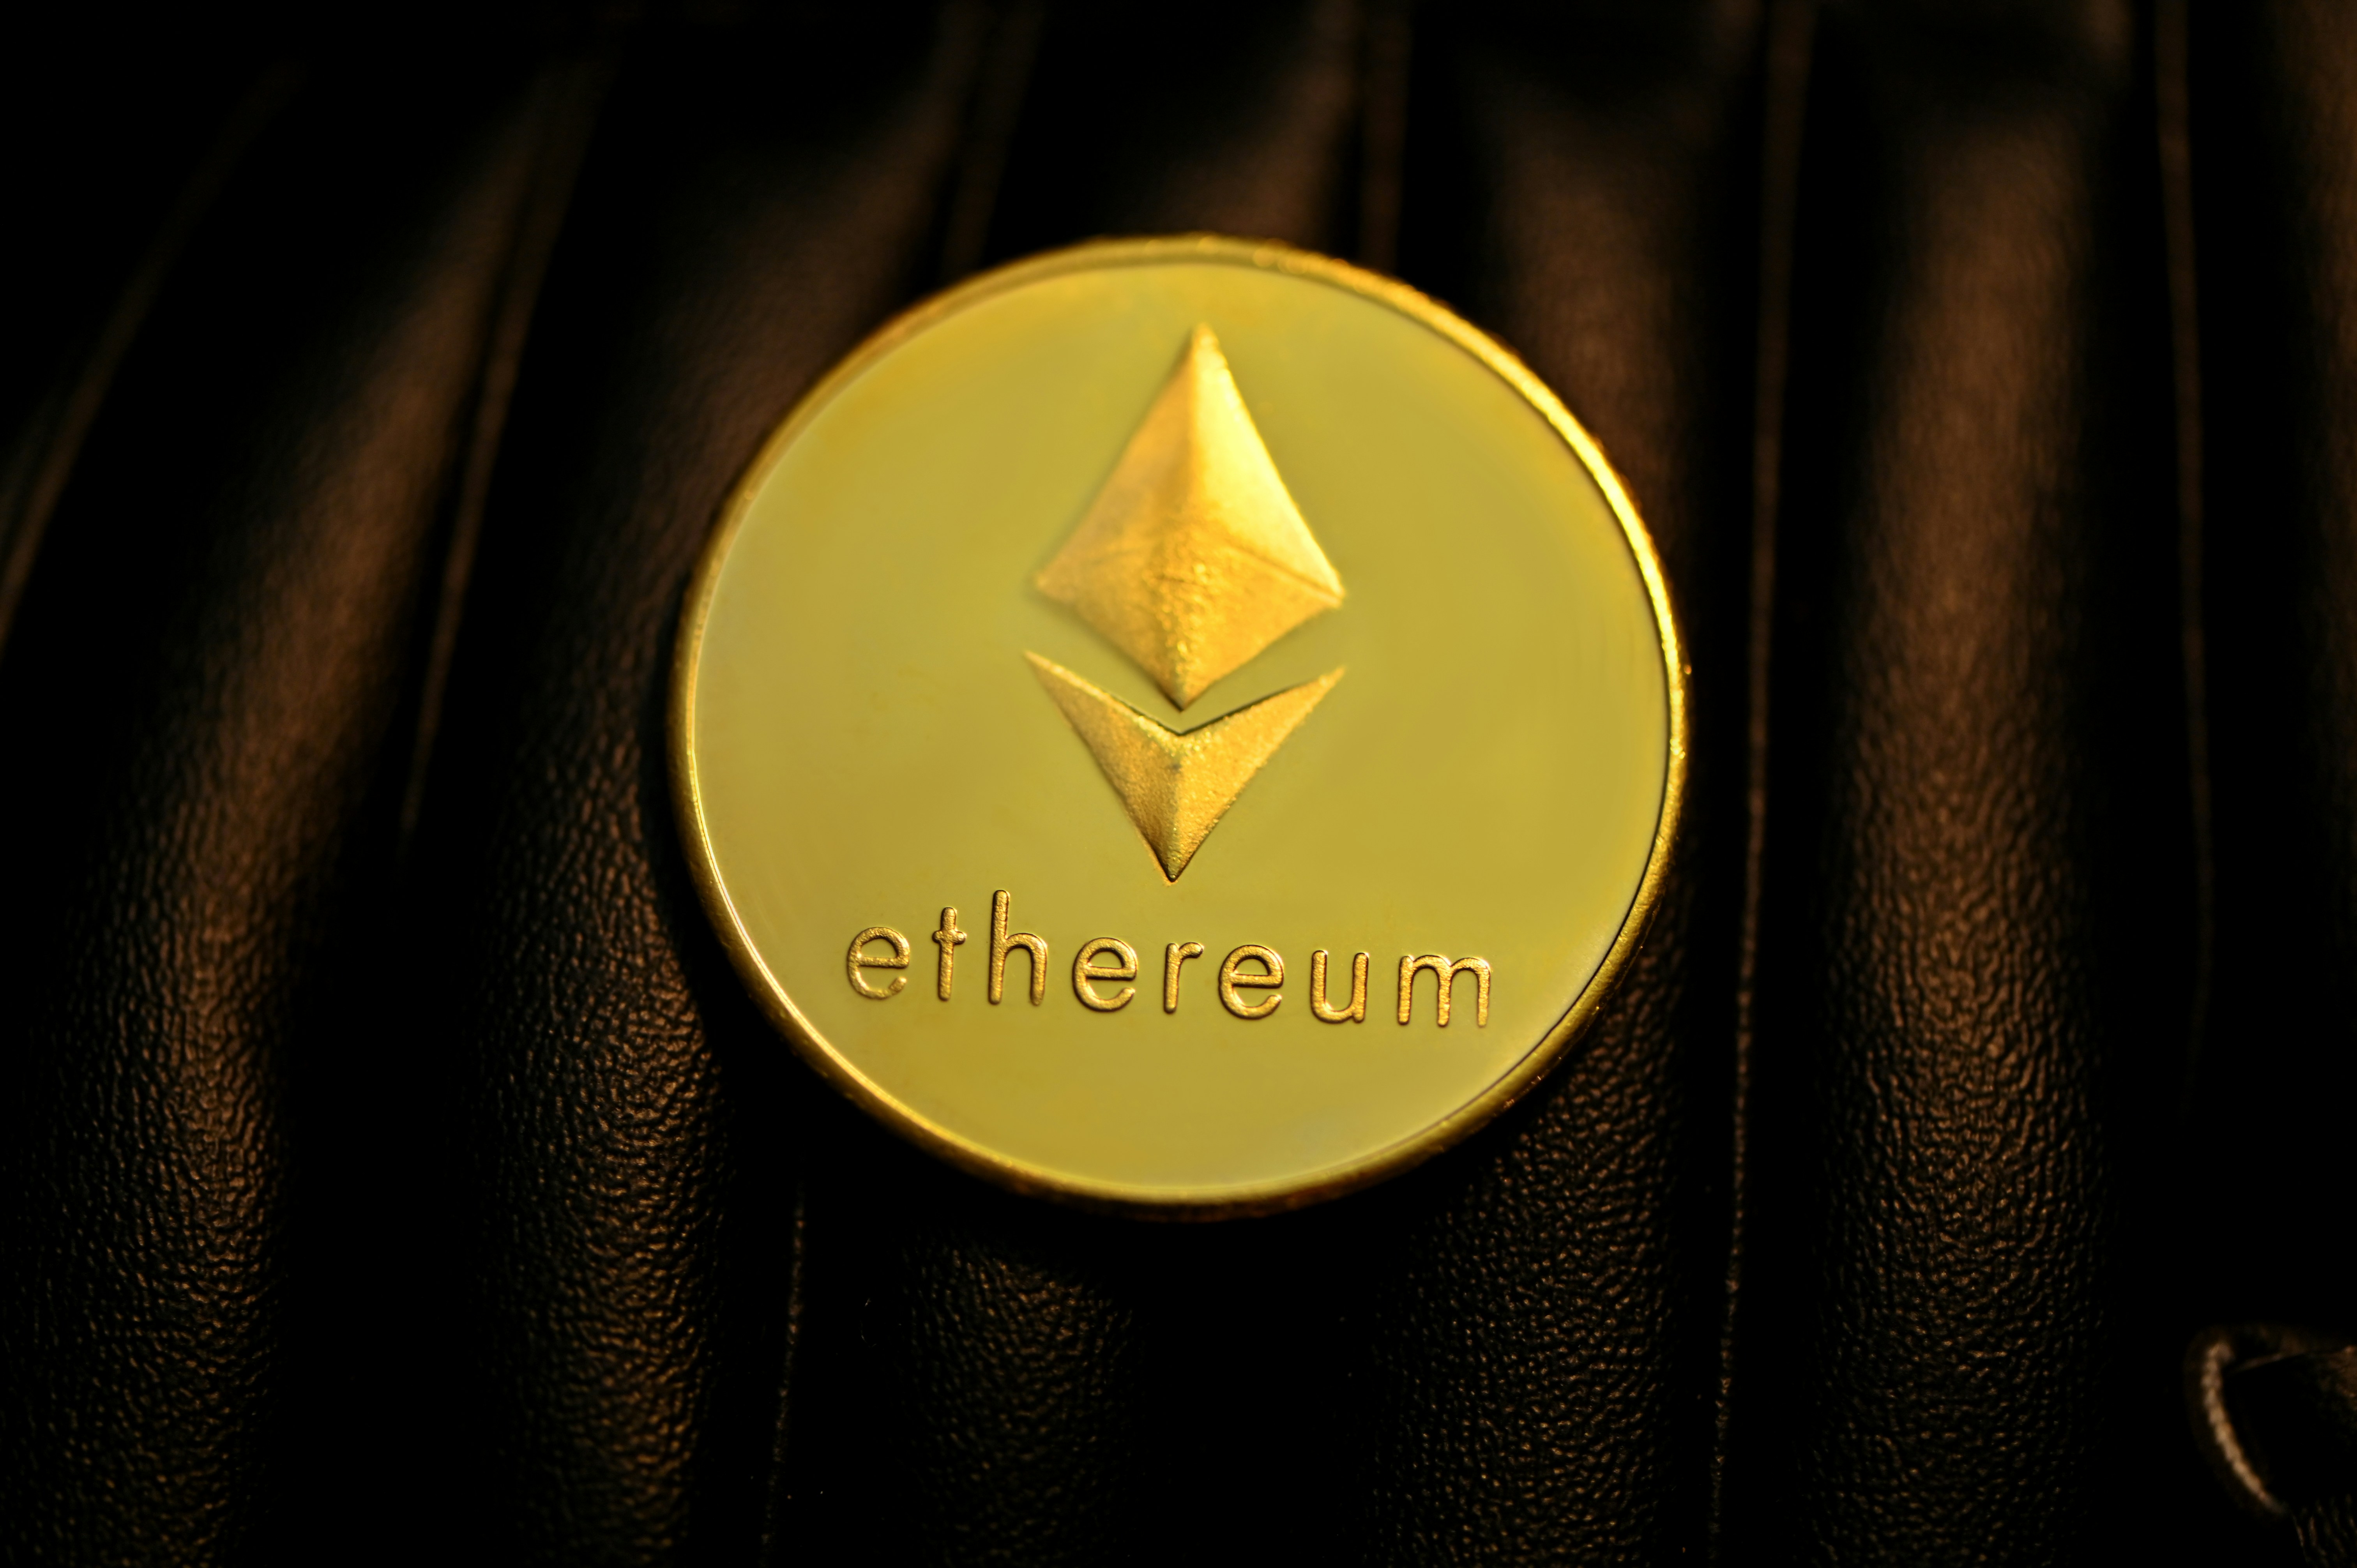 Ethereum on a dark leather surface.